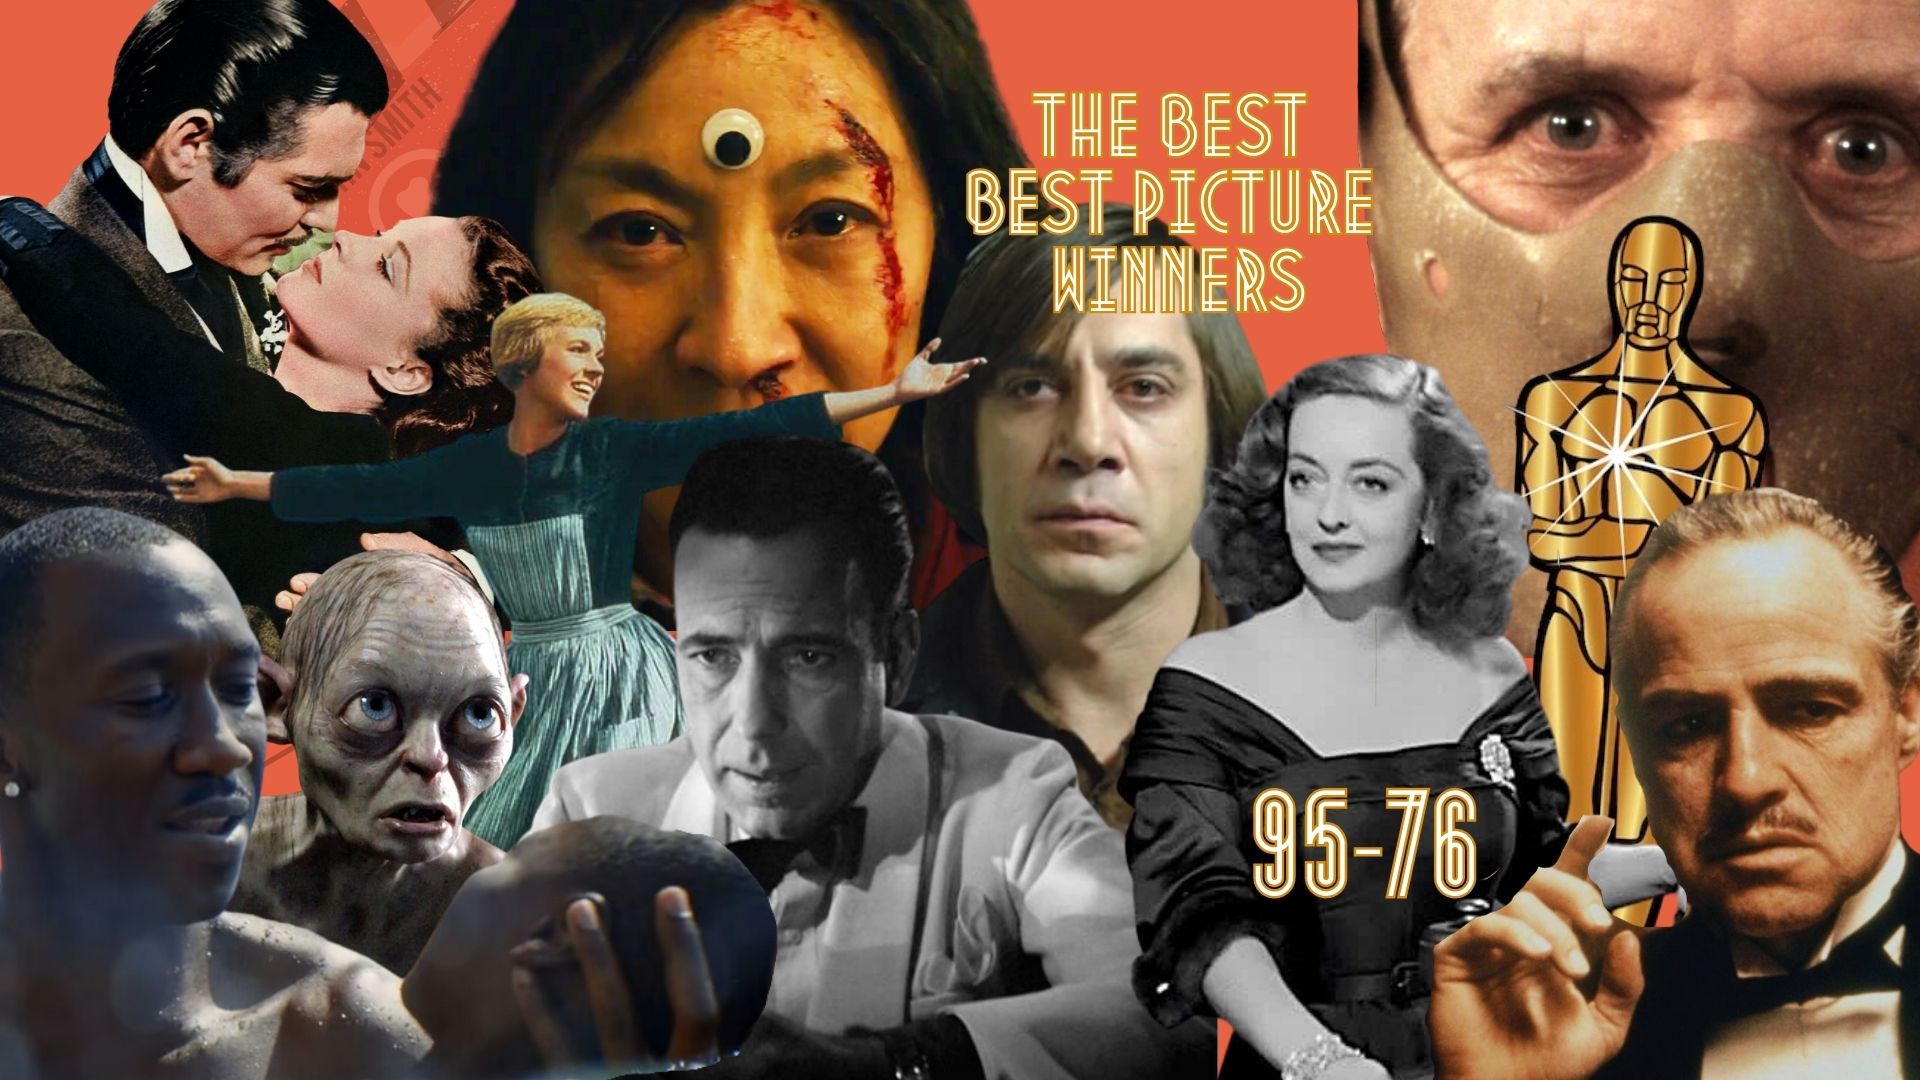 95 Years of Oscars: Ranking The Best Picture Winners: #95-76